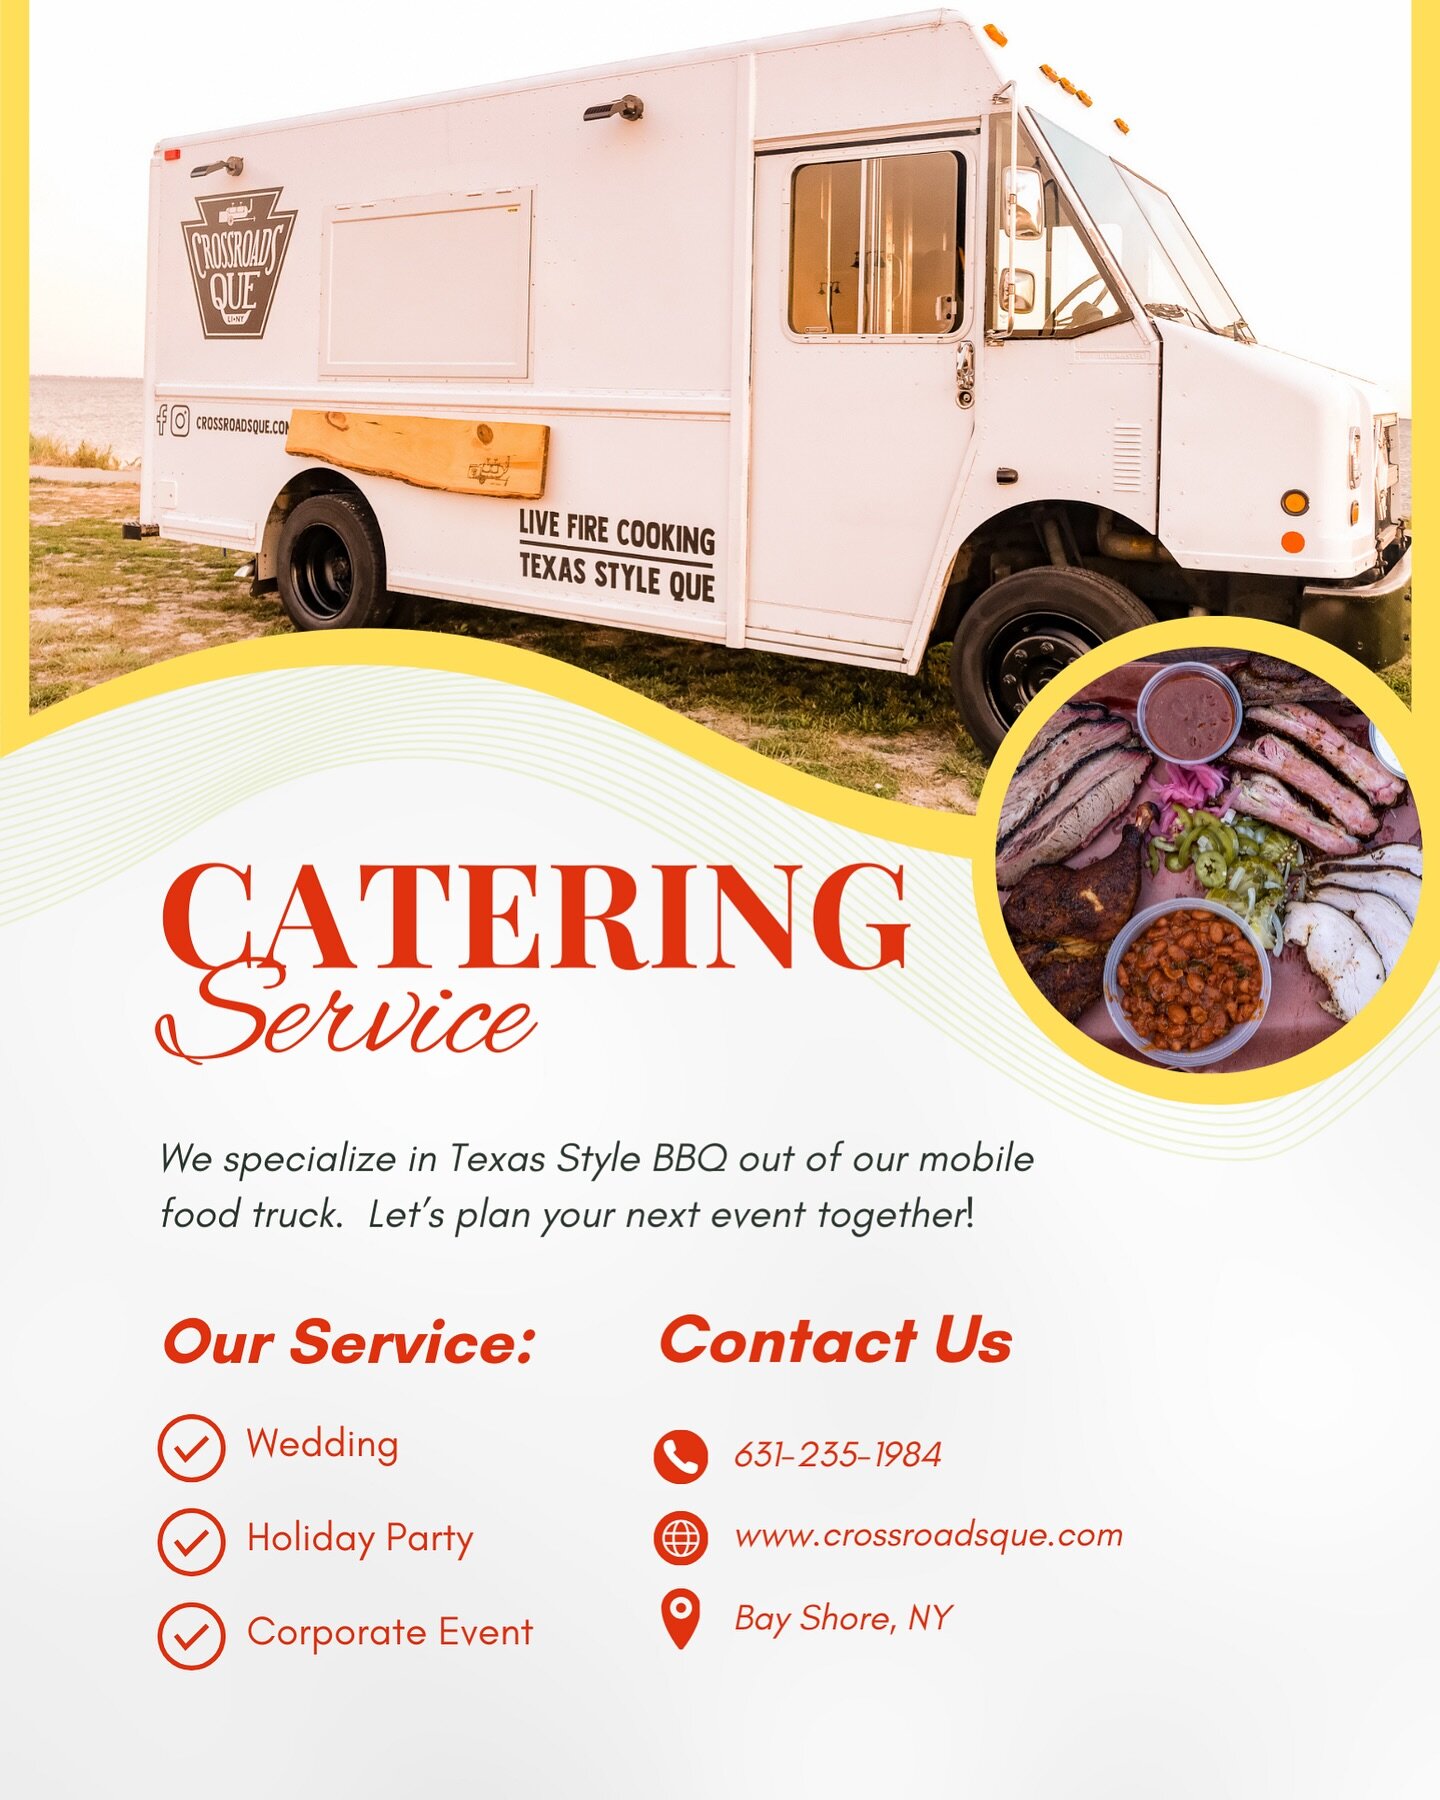 Our food truck is ready to pull up at your next event you are planning. If you work at an office park, say hello, we can serve your coworkers during your lunch hours. Let&rsquo;s chat about what works best for you and your party!

#meatmobile #crossr